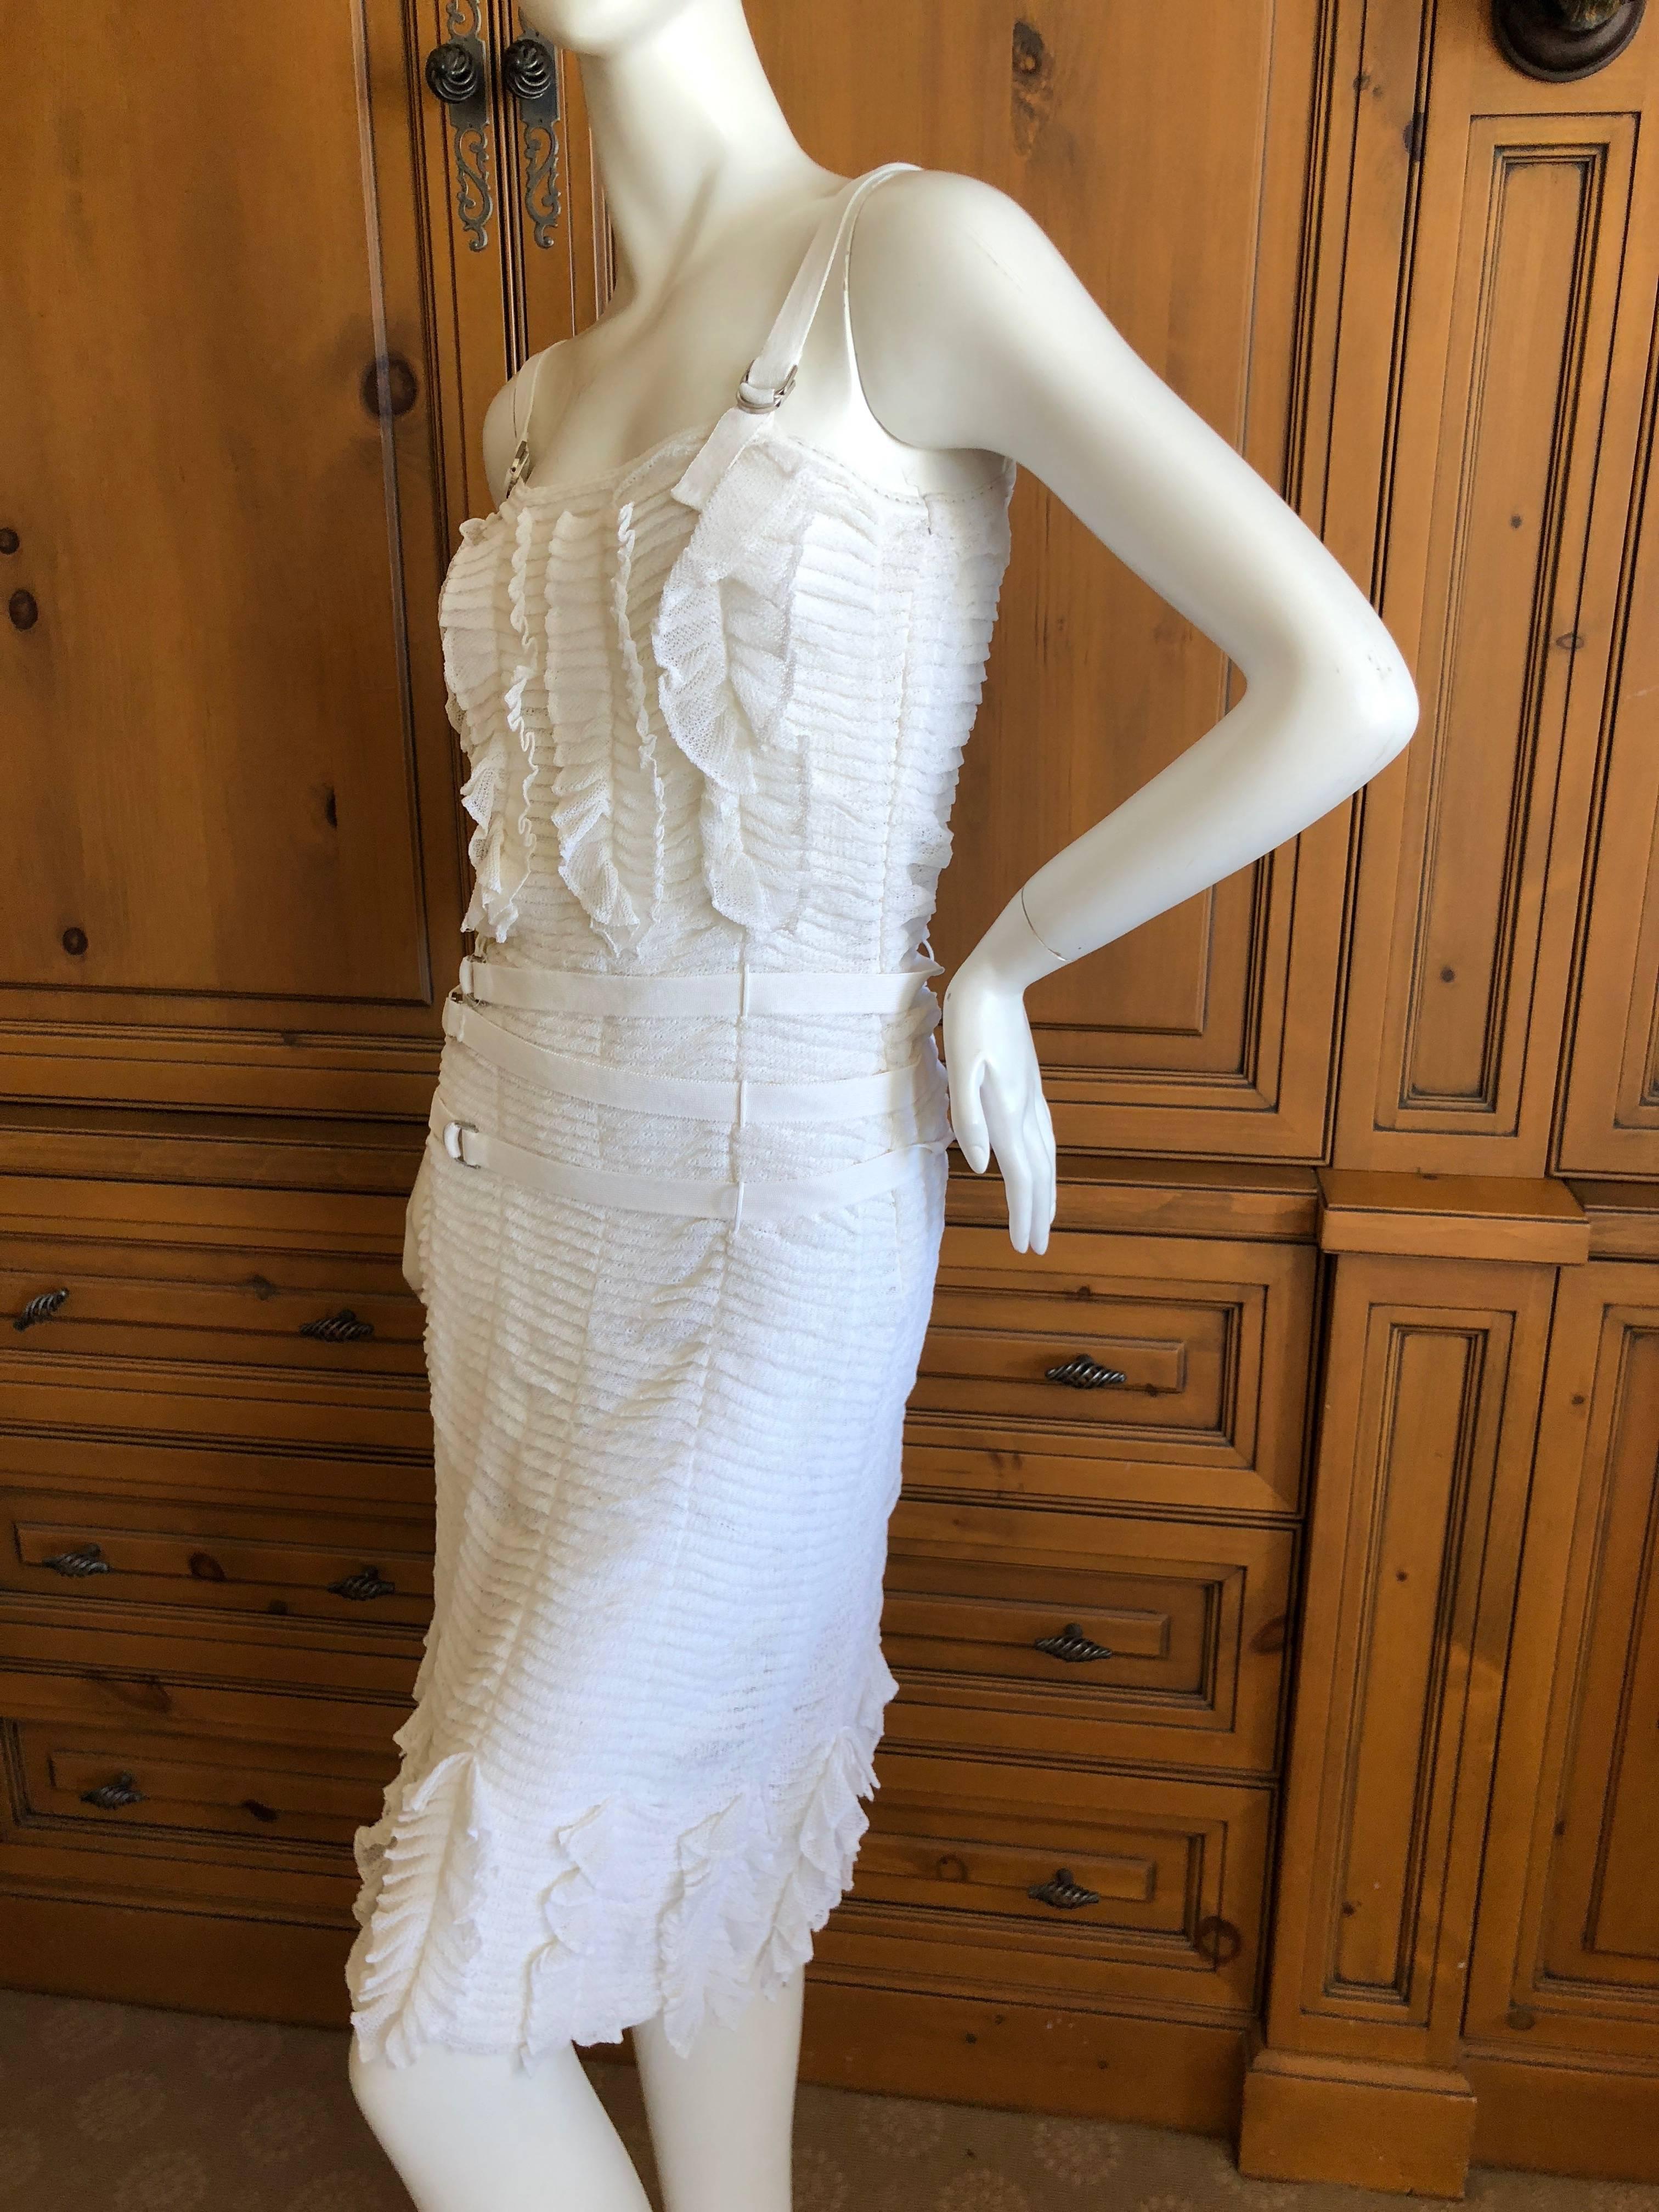 Christian Dior by John Galliano Gauzy White Ribbon Dress  In Excellent Condition For Sale In Cloverdale, CA